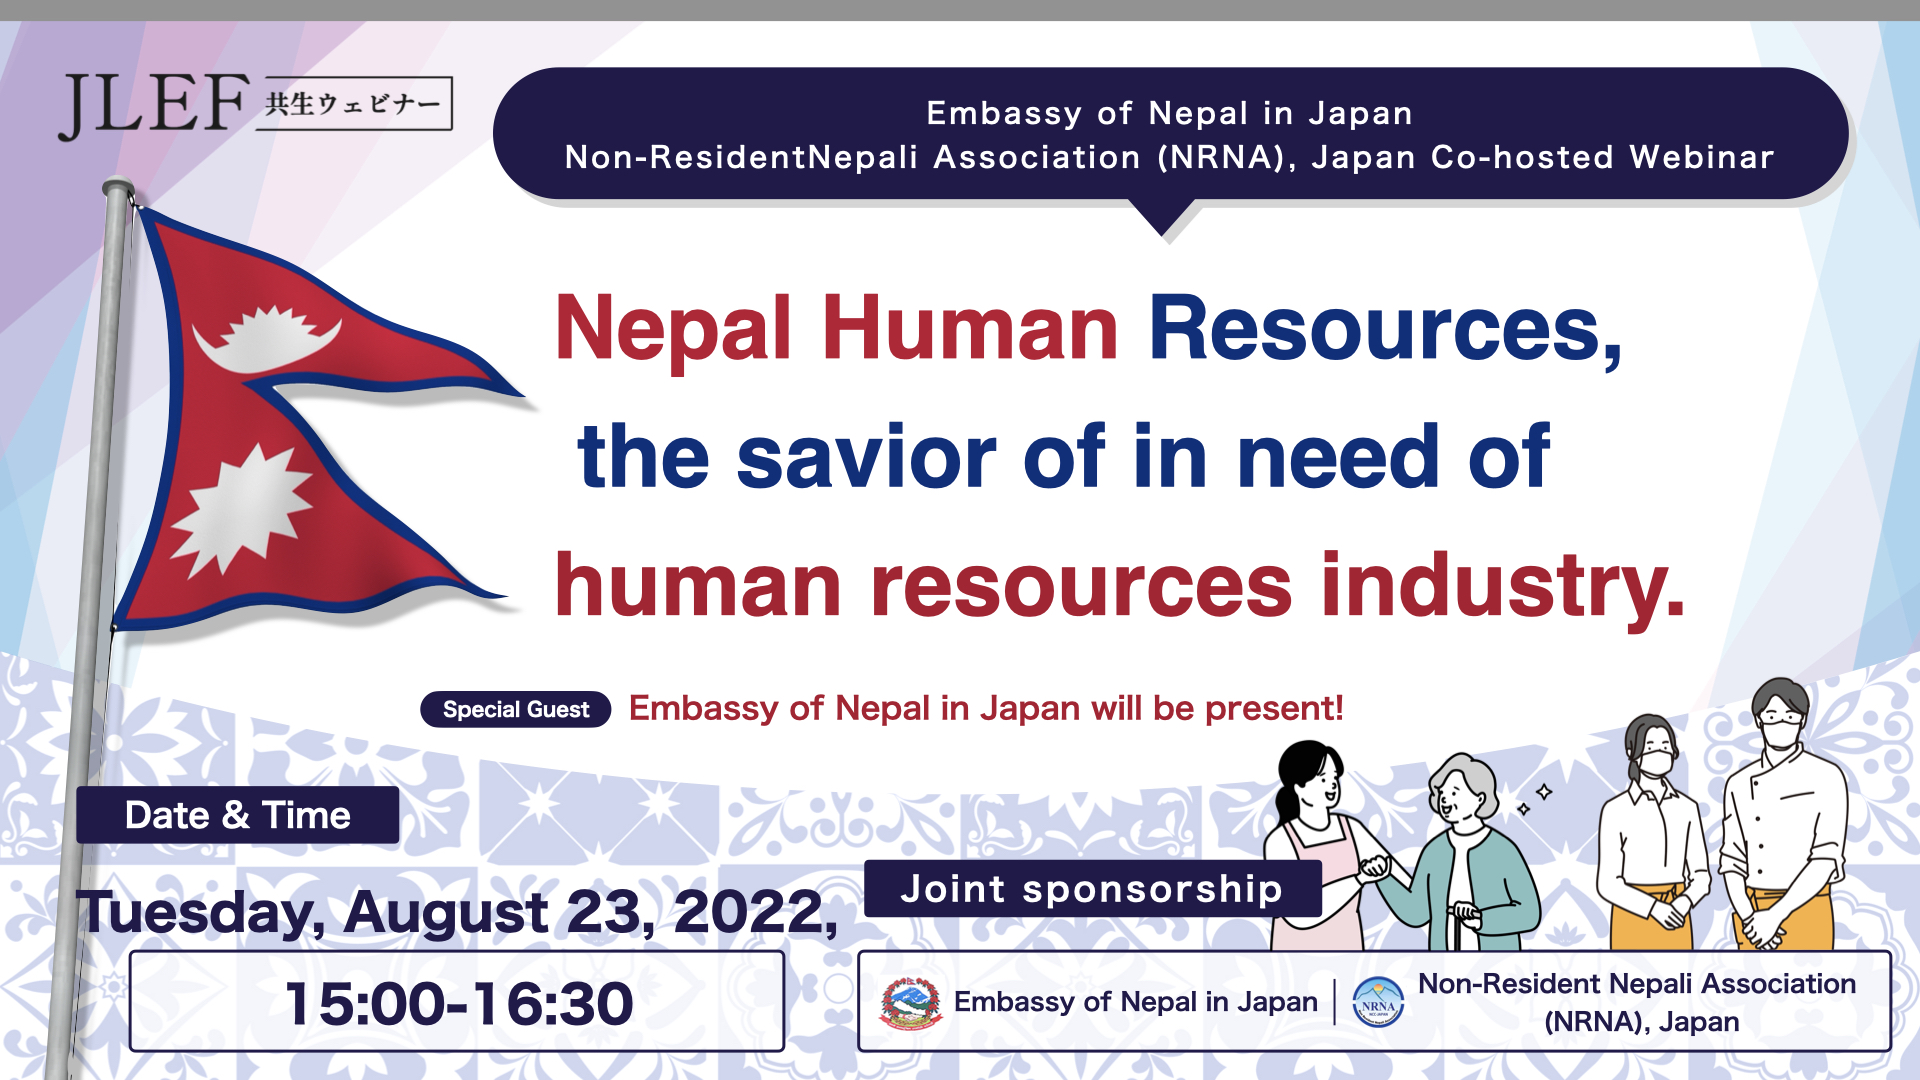 【Tuesday, August 23, 2022,15:00-16:30】Nepal Human Resources, the savior of in need of human resources industry